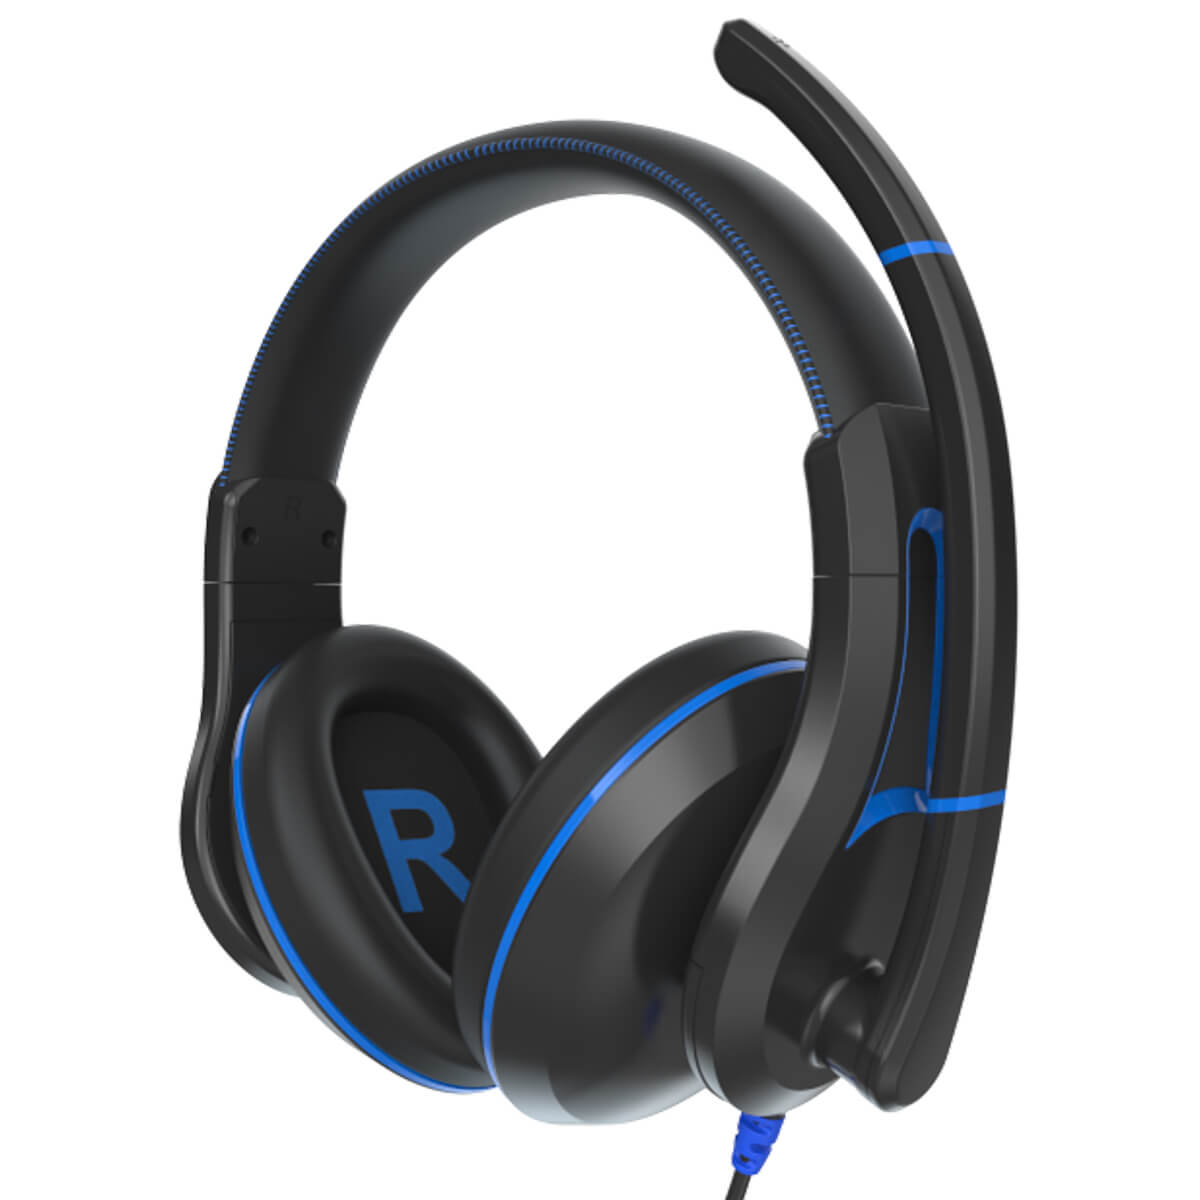 Ultra Durable Pro Headsets with USB plug - Learning Headphones